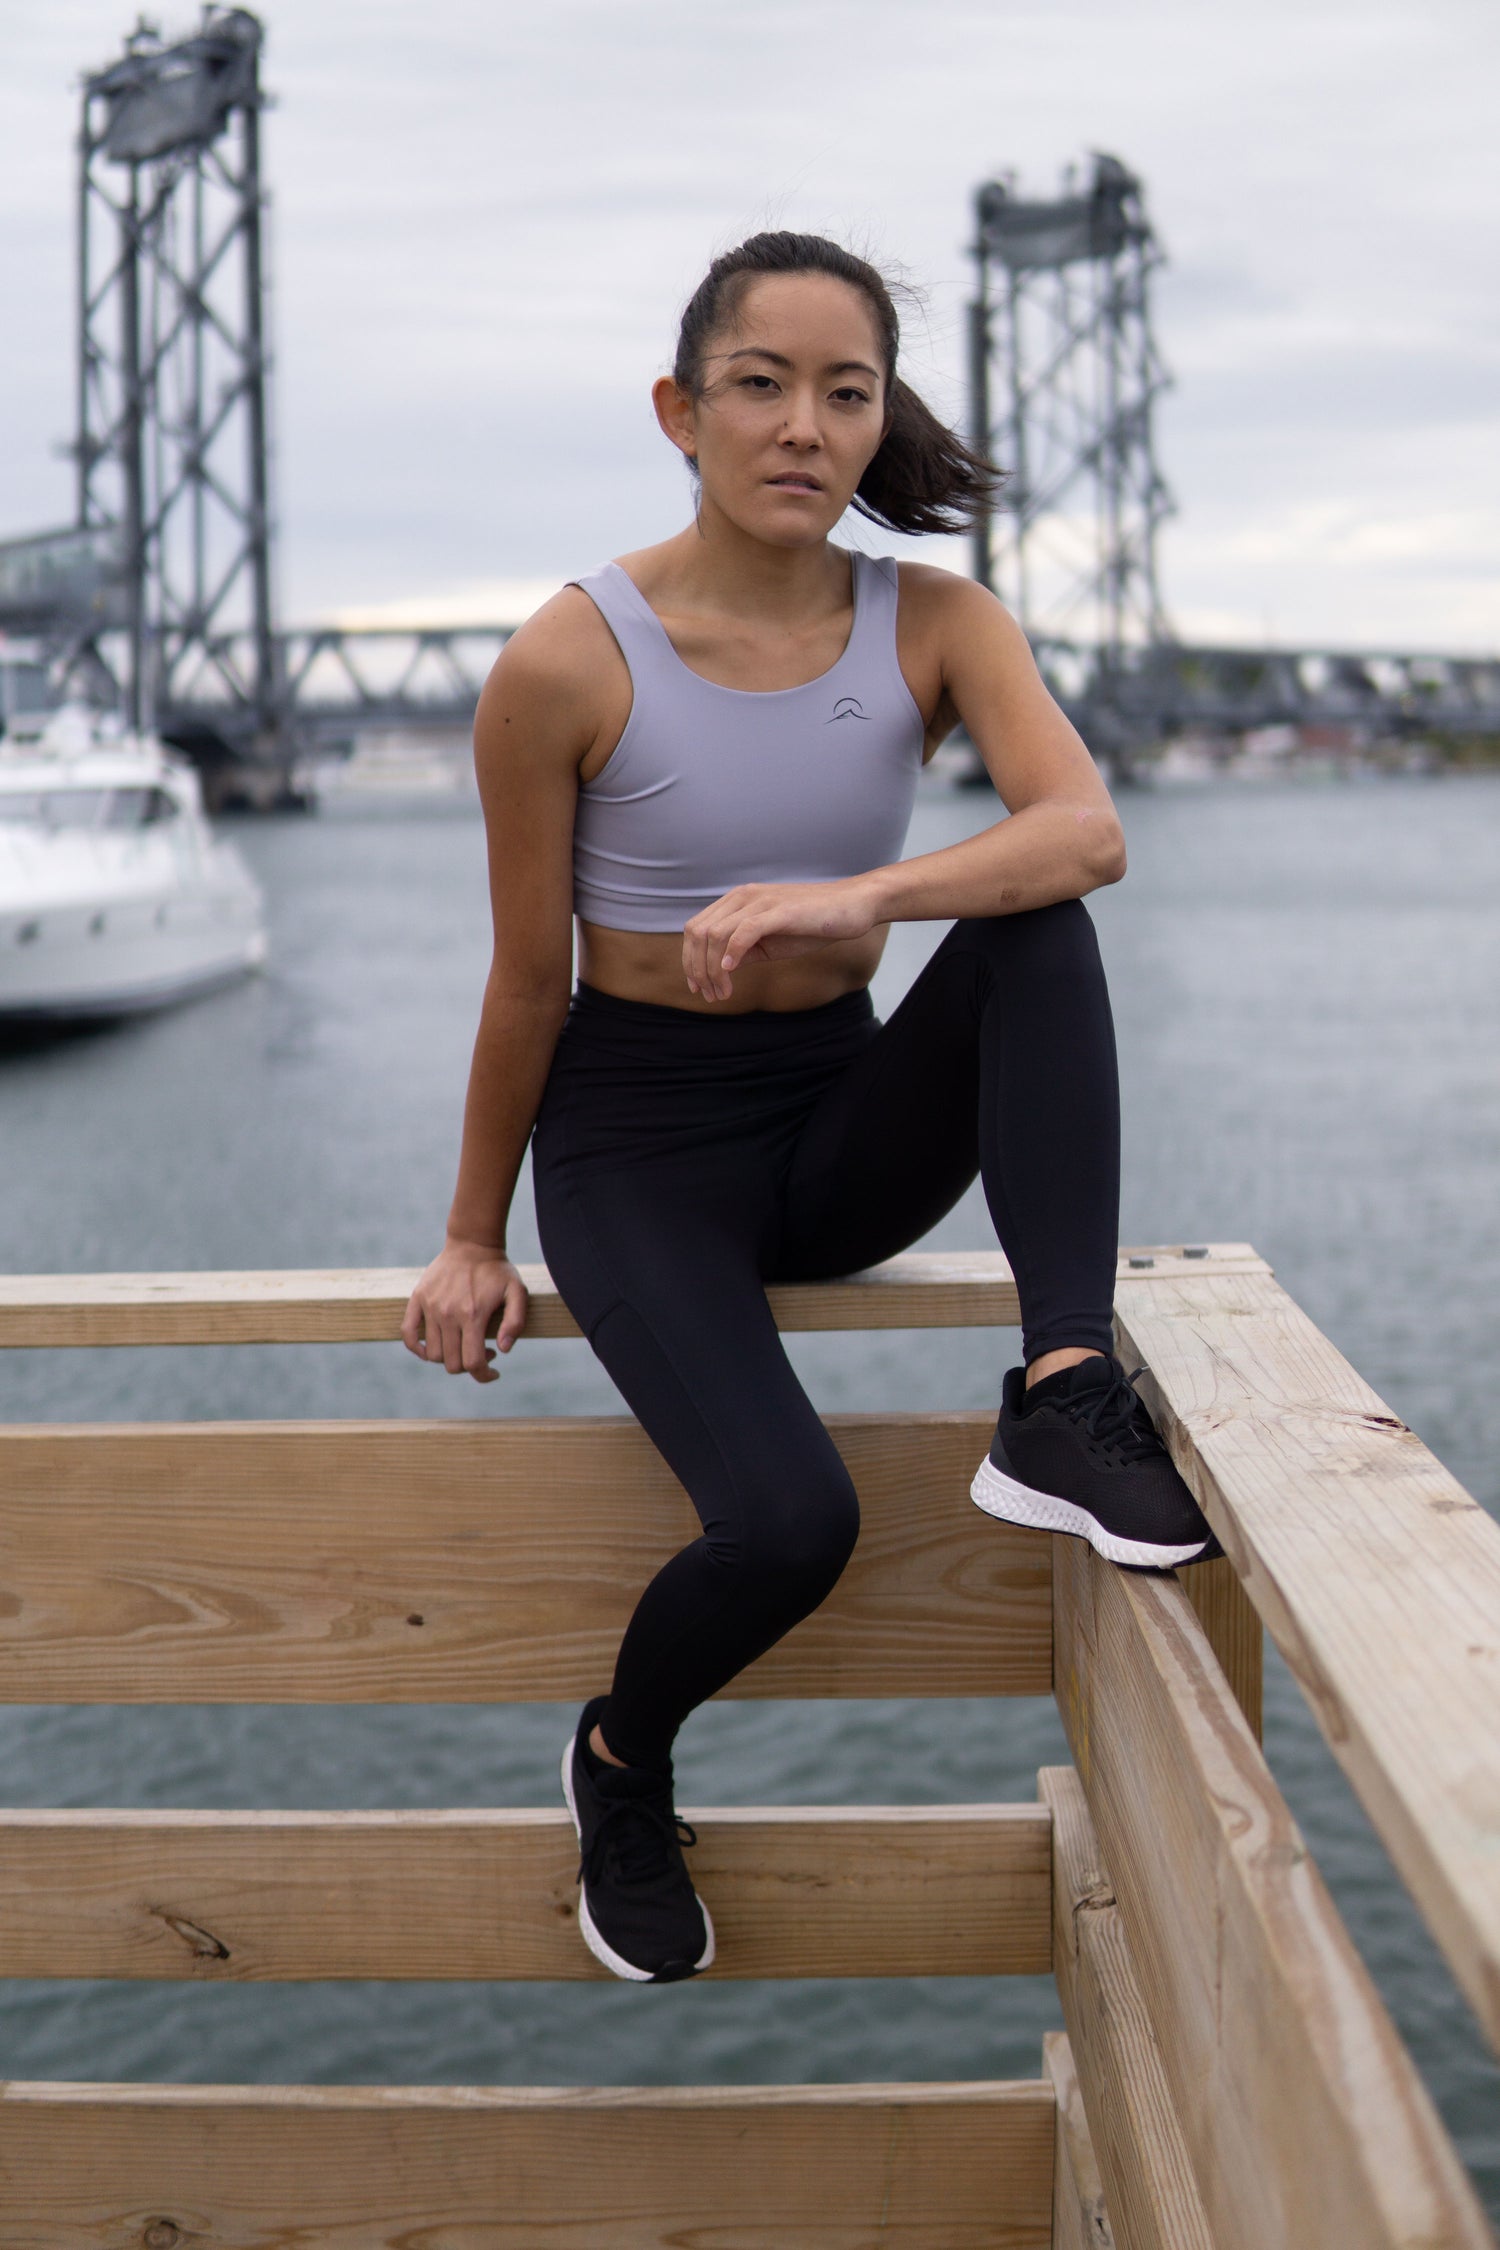 pony-tailed woman sitting on wooden deck wearing sports bra and leggings